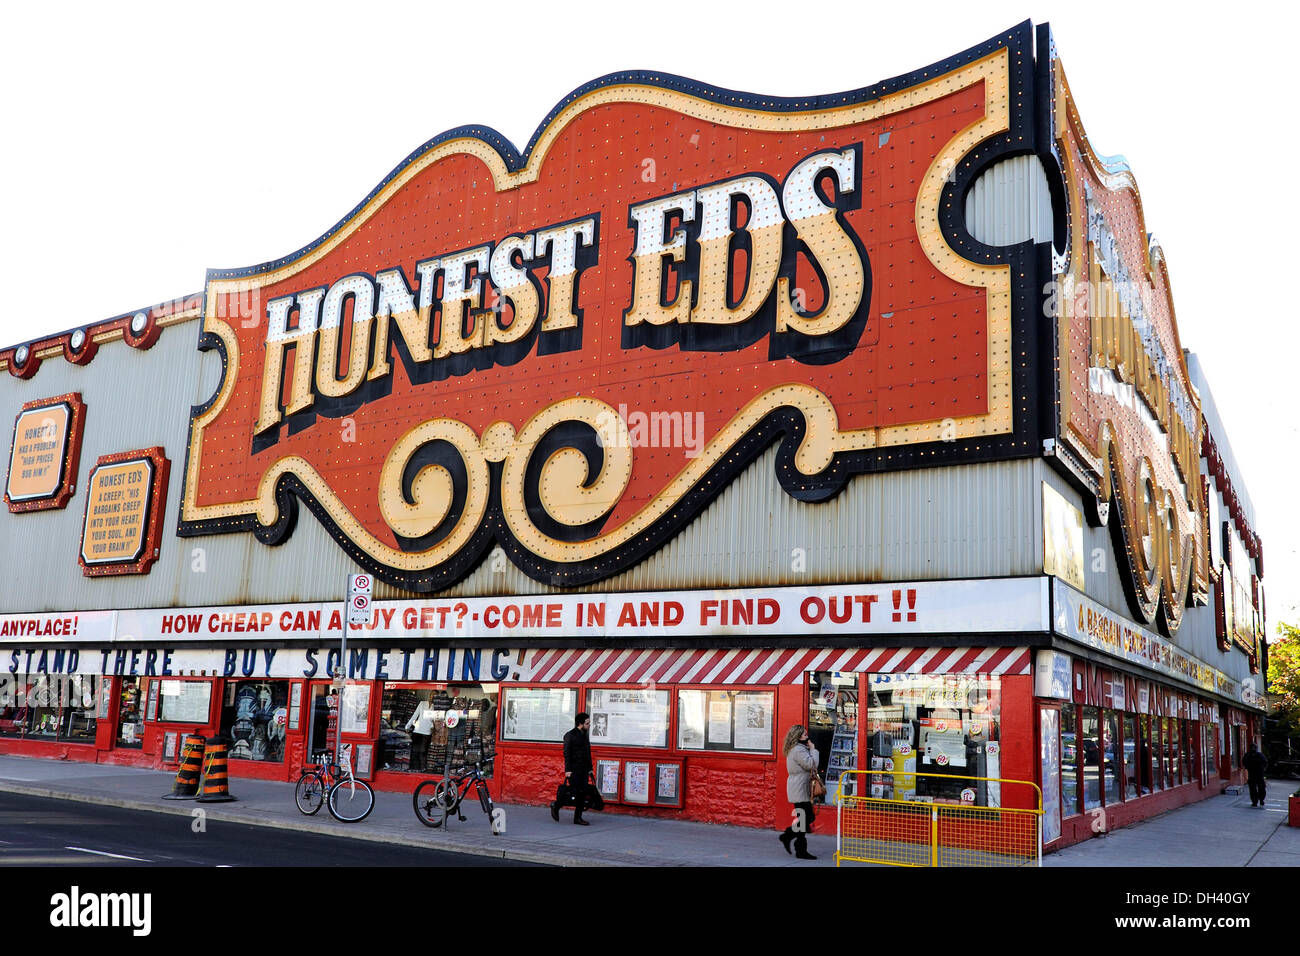 Toronto, Canada. 28th Oct 2013.  Toronto landmark discount store HONEST ED'S, located at Bathurst Street and Bloor Street West in the Annex Neighborhood, has been sold to Vancouver based developer Westbank Properties by the Mirvish family. Stock Photo